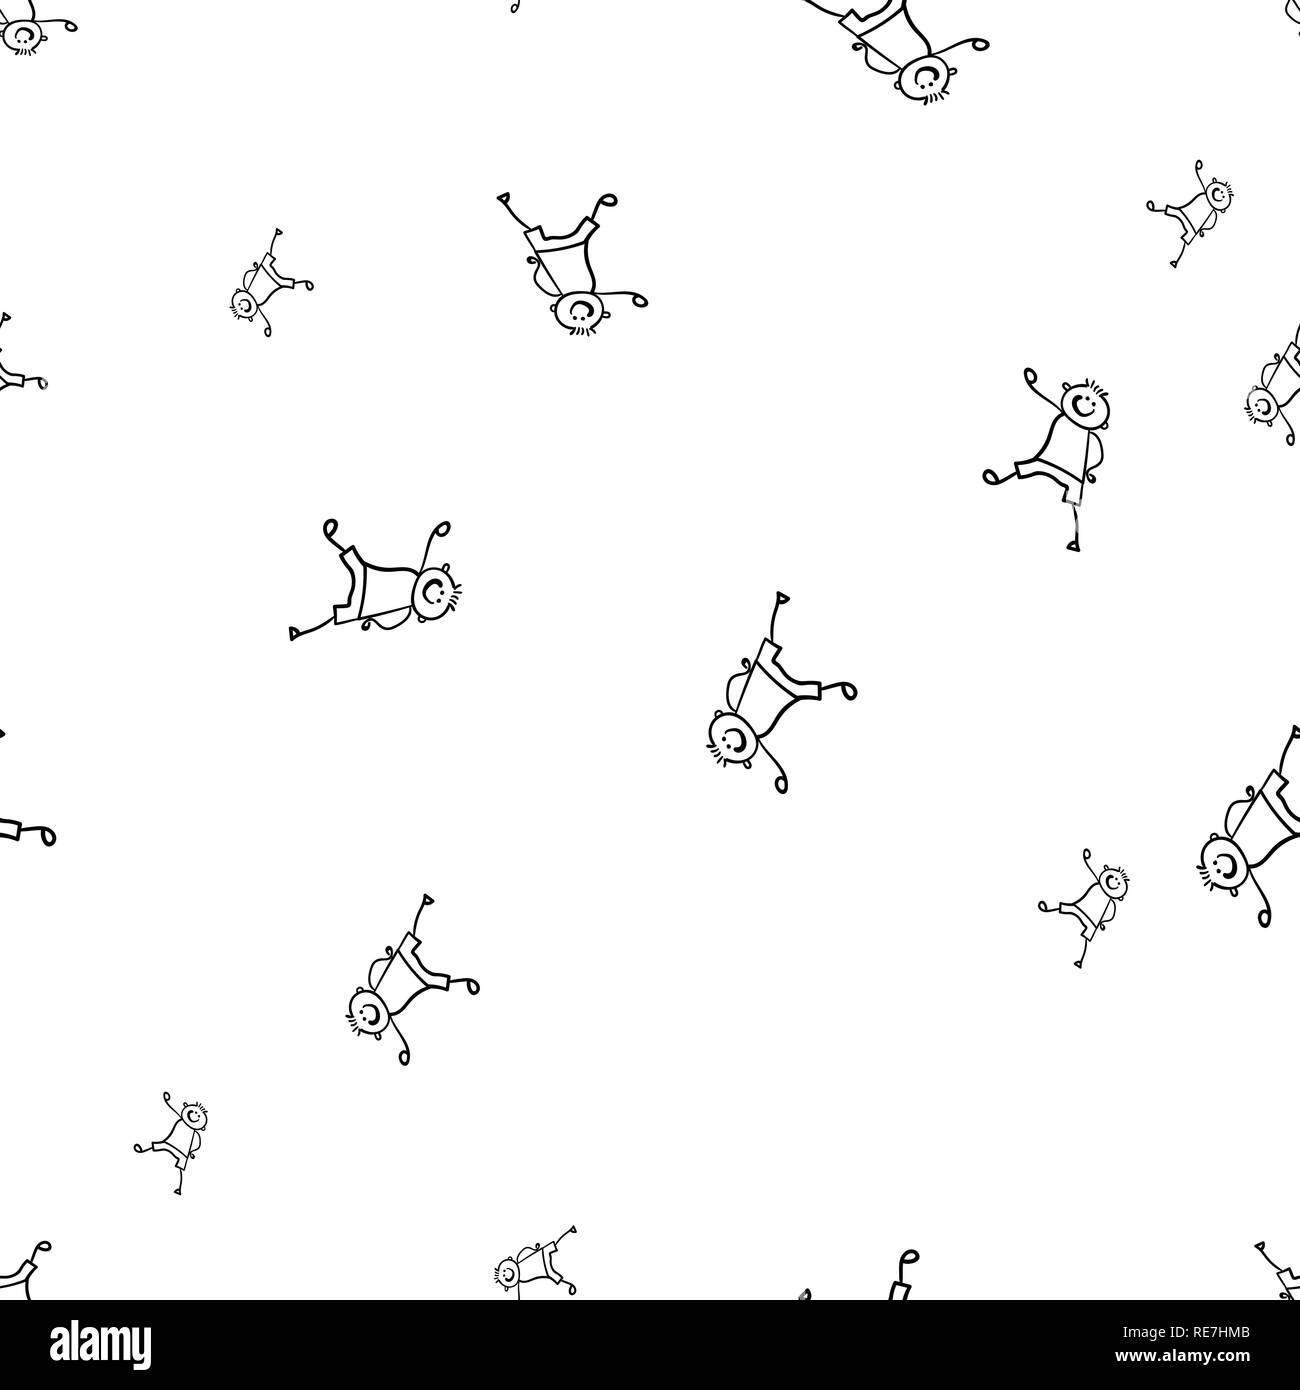 Kids seamless pattern in doodle style. Vector illustration on white background. Stock Vector